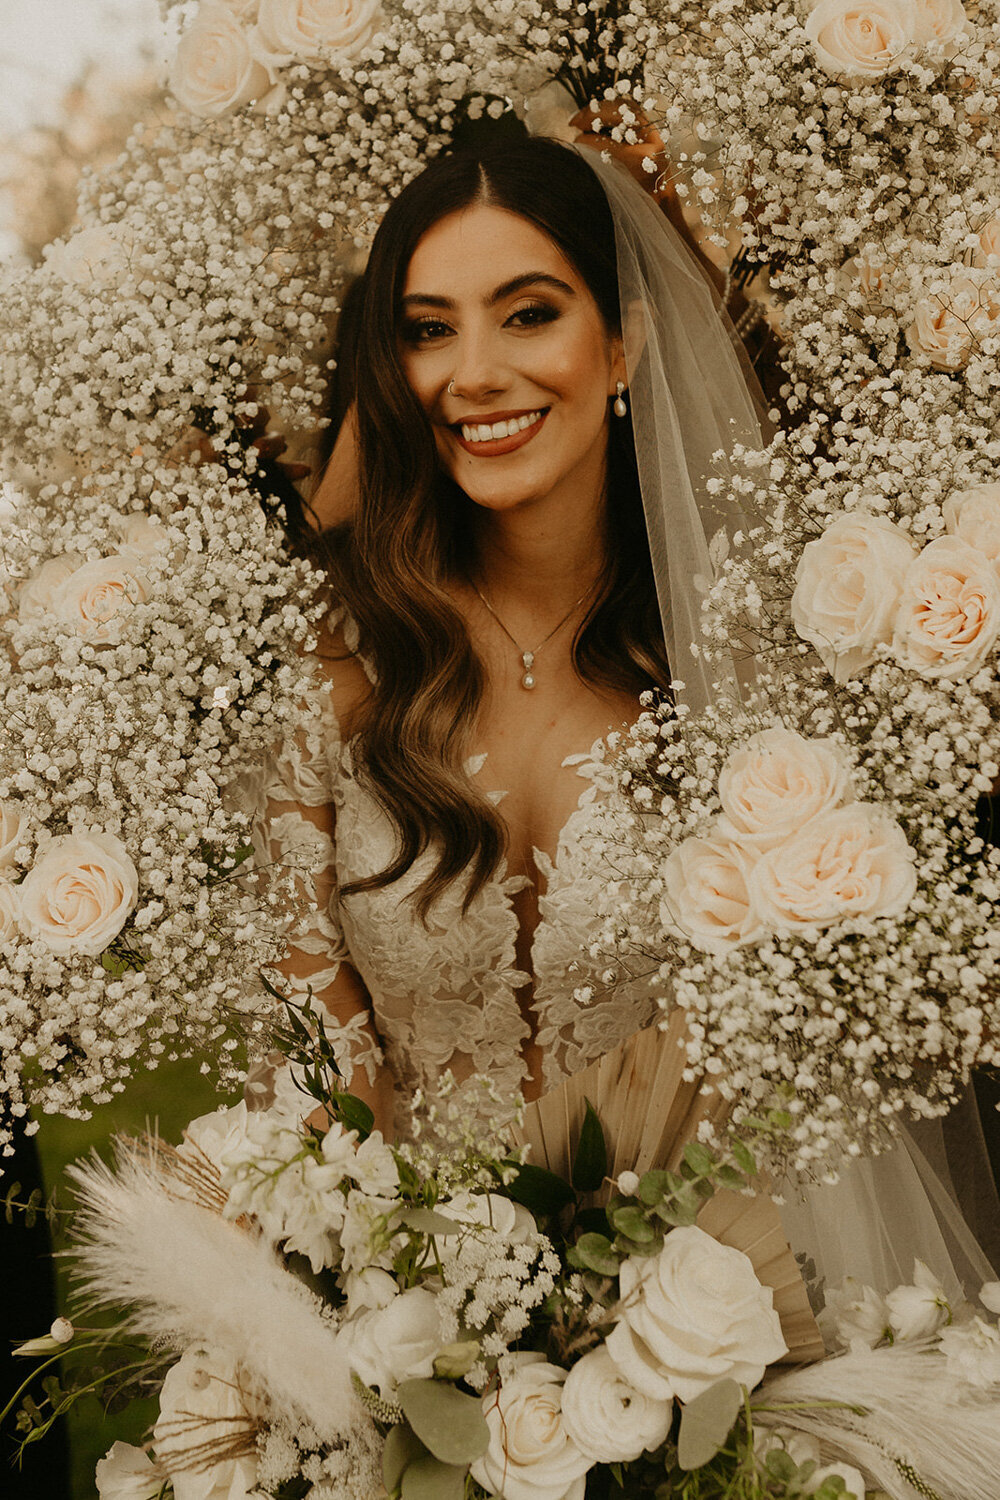 Beautiful bride surrounded by elegant flowers